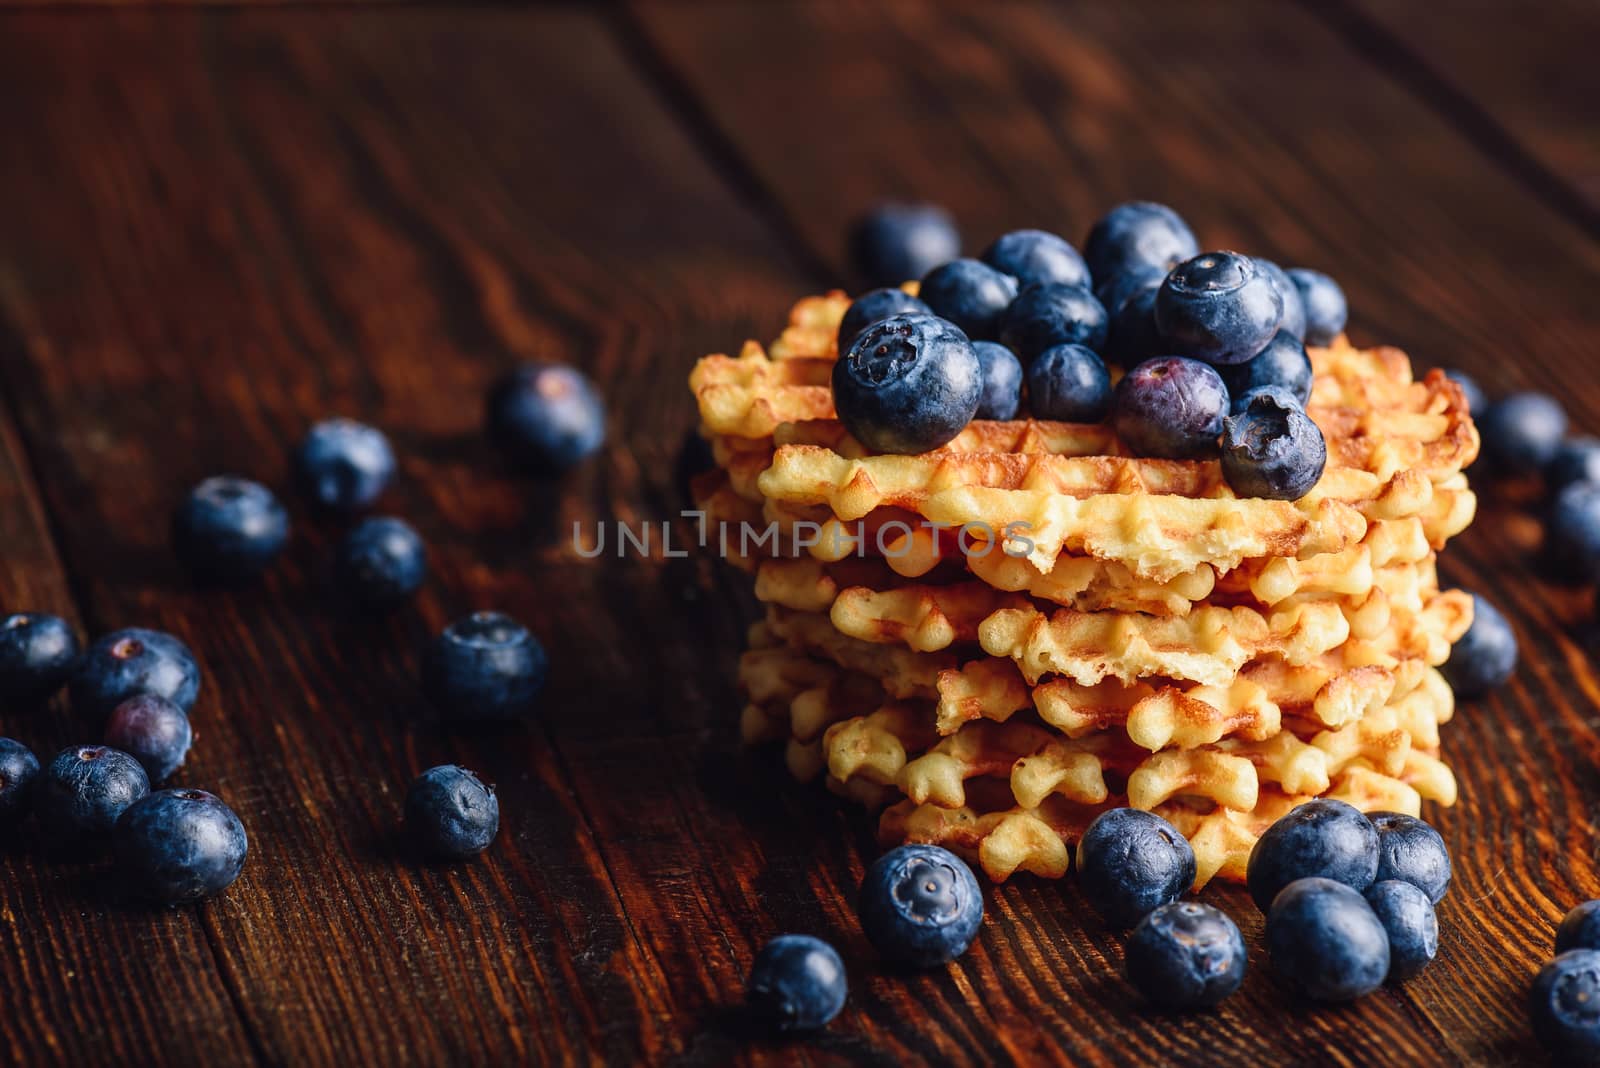 Blueberries on the Top of the Waffles Stack and Other Scattered on Wooden Background. Copy Space on the Left.